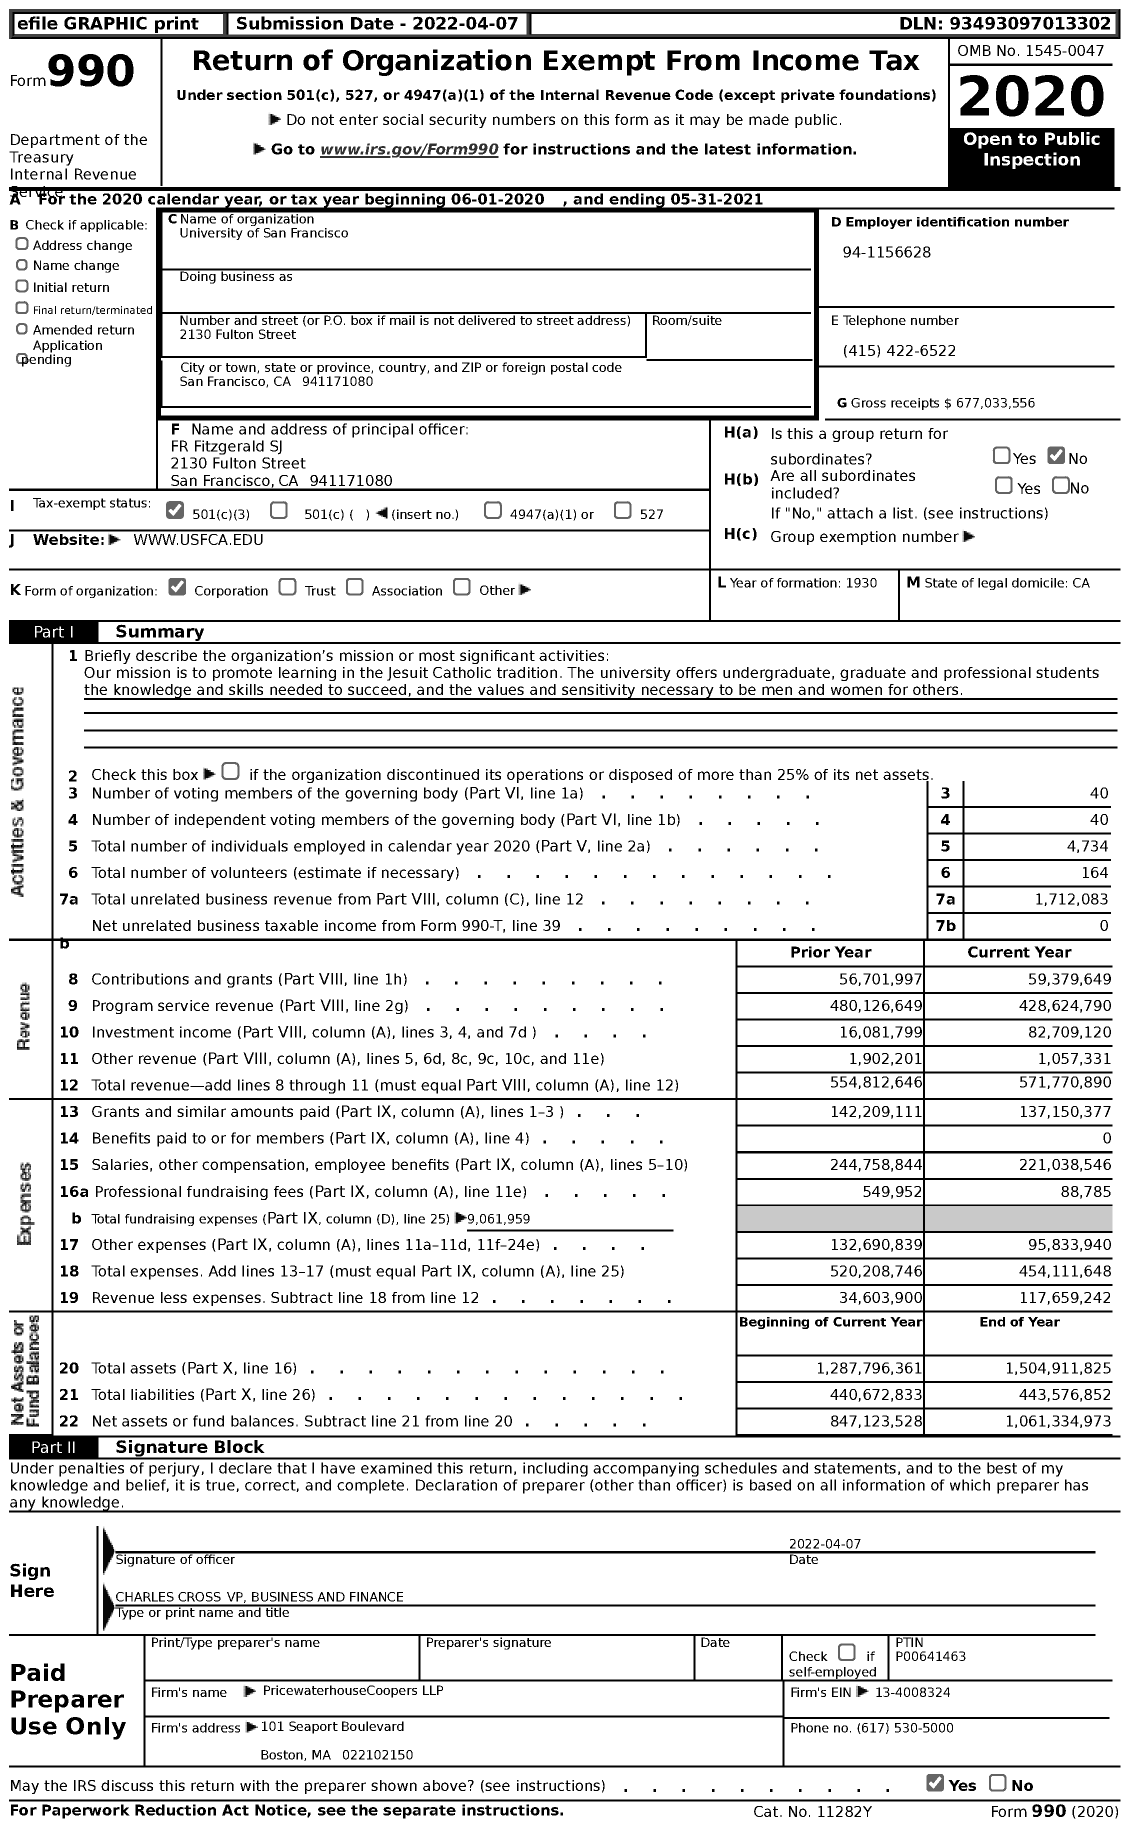 Image of first page of 2020 Form 990 for University of San Francisco (USF)